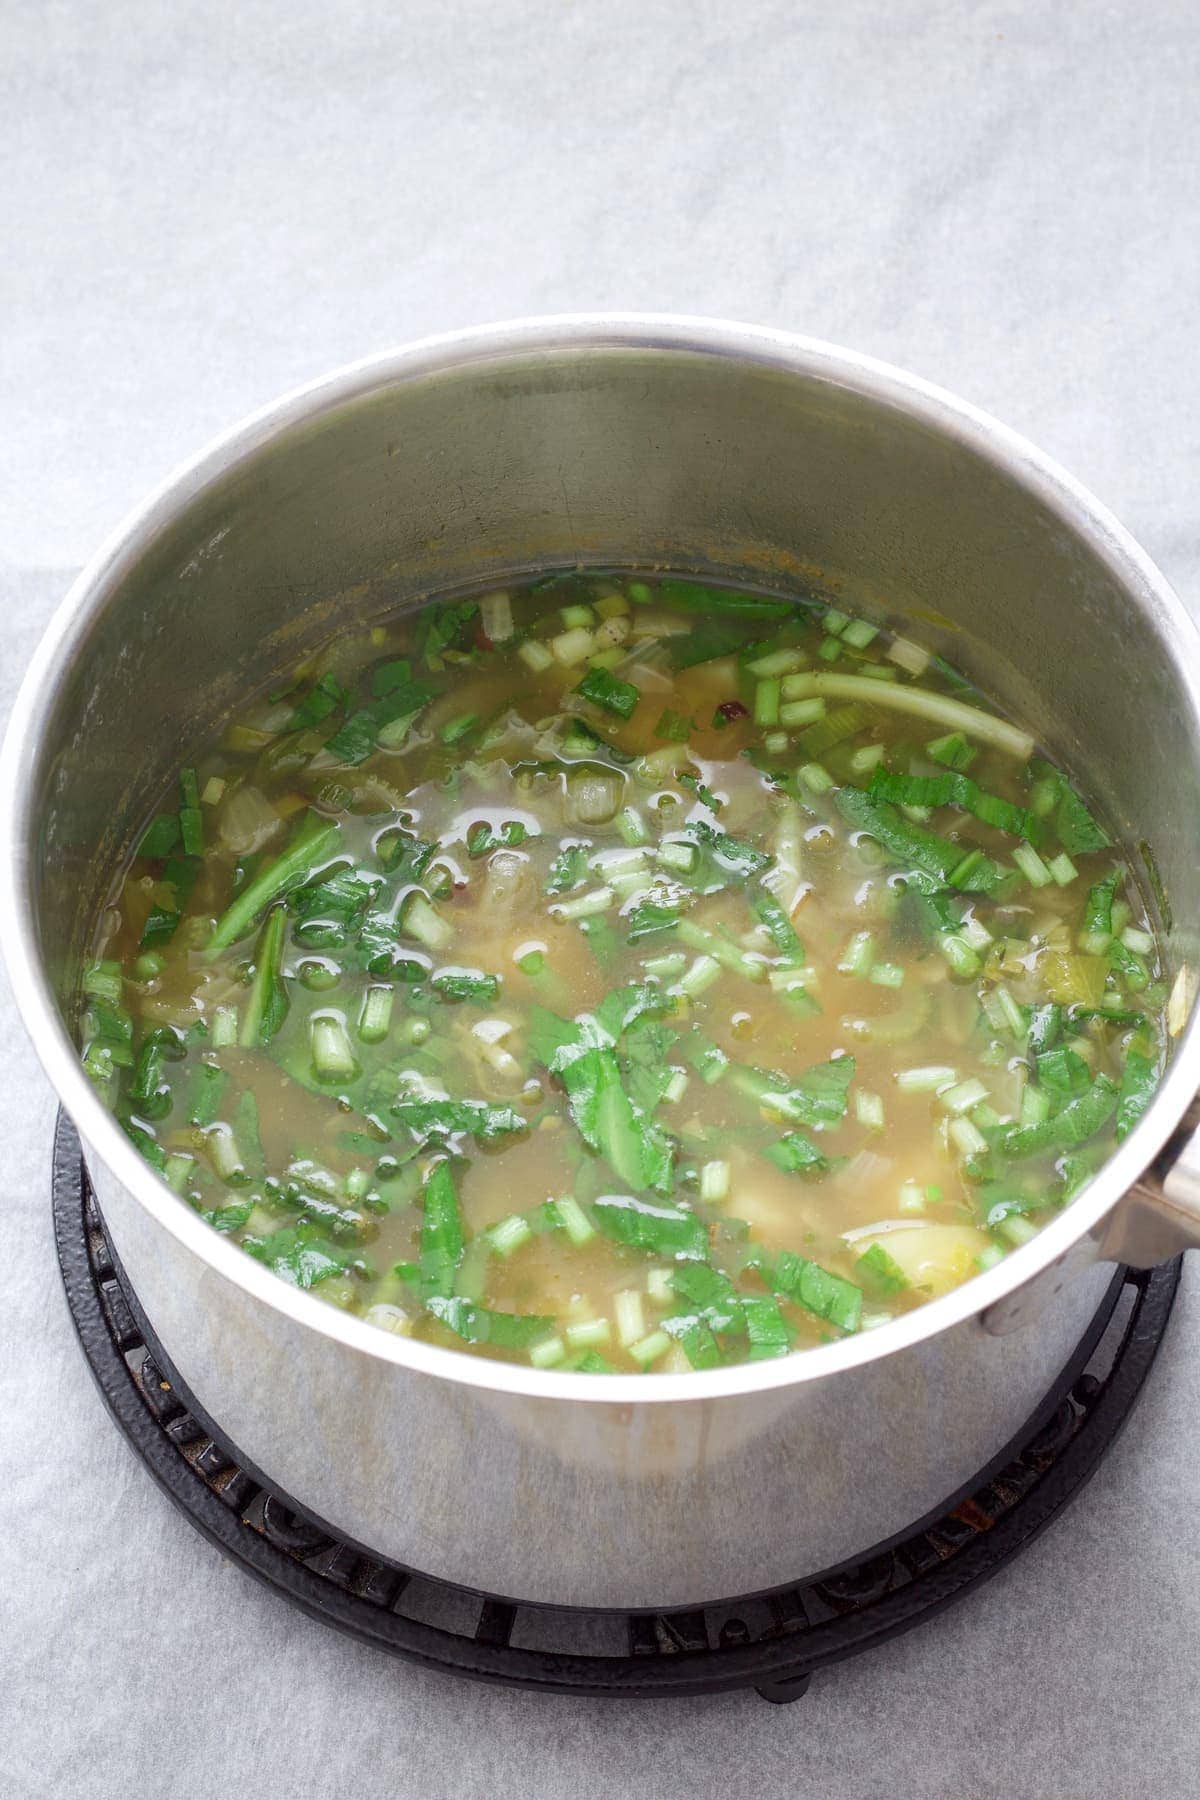 Soup in a pot before blending.